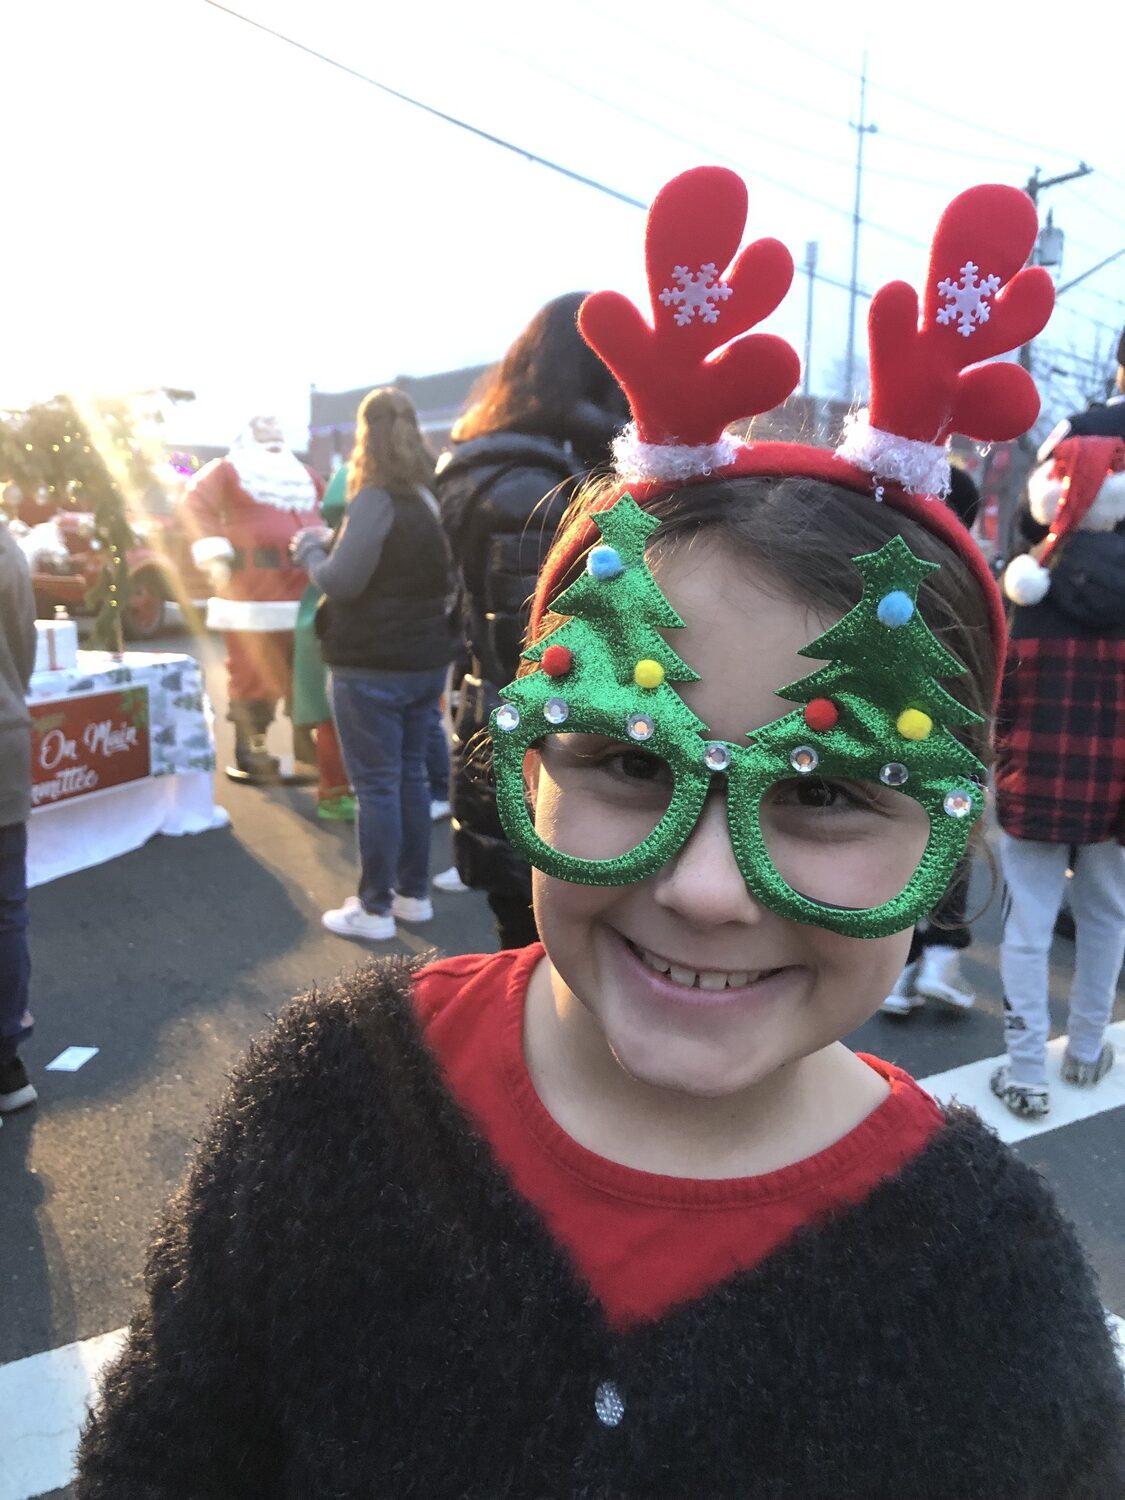 Claire Riley gets into the spirit at the second annual “Holiday on Main” event in East Quogue on Saturday.  CAILIN RILEY